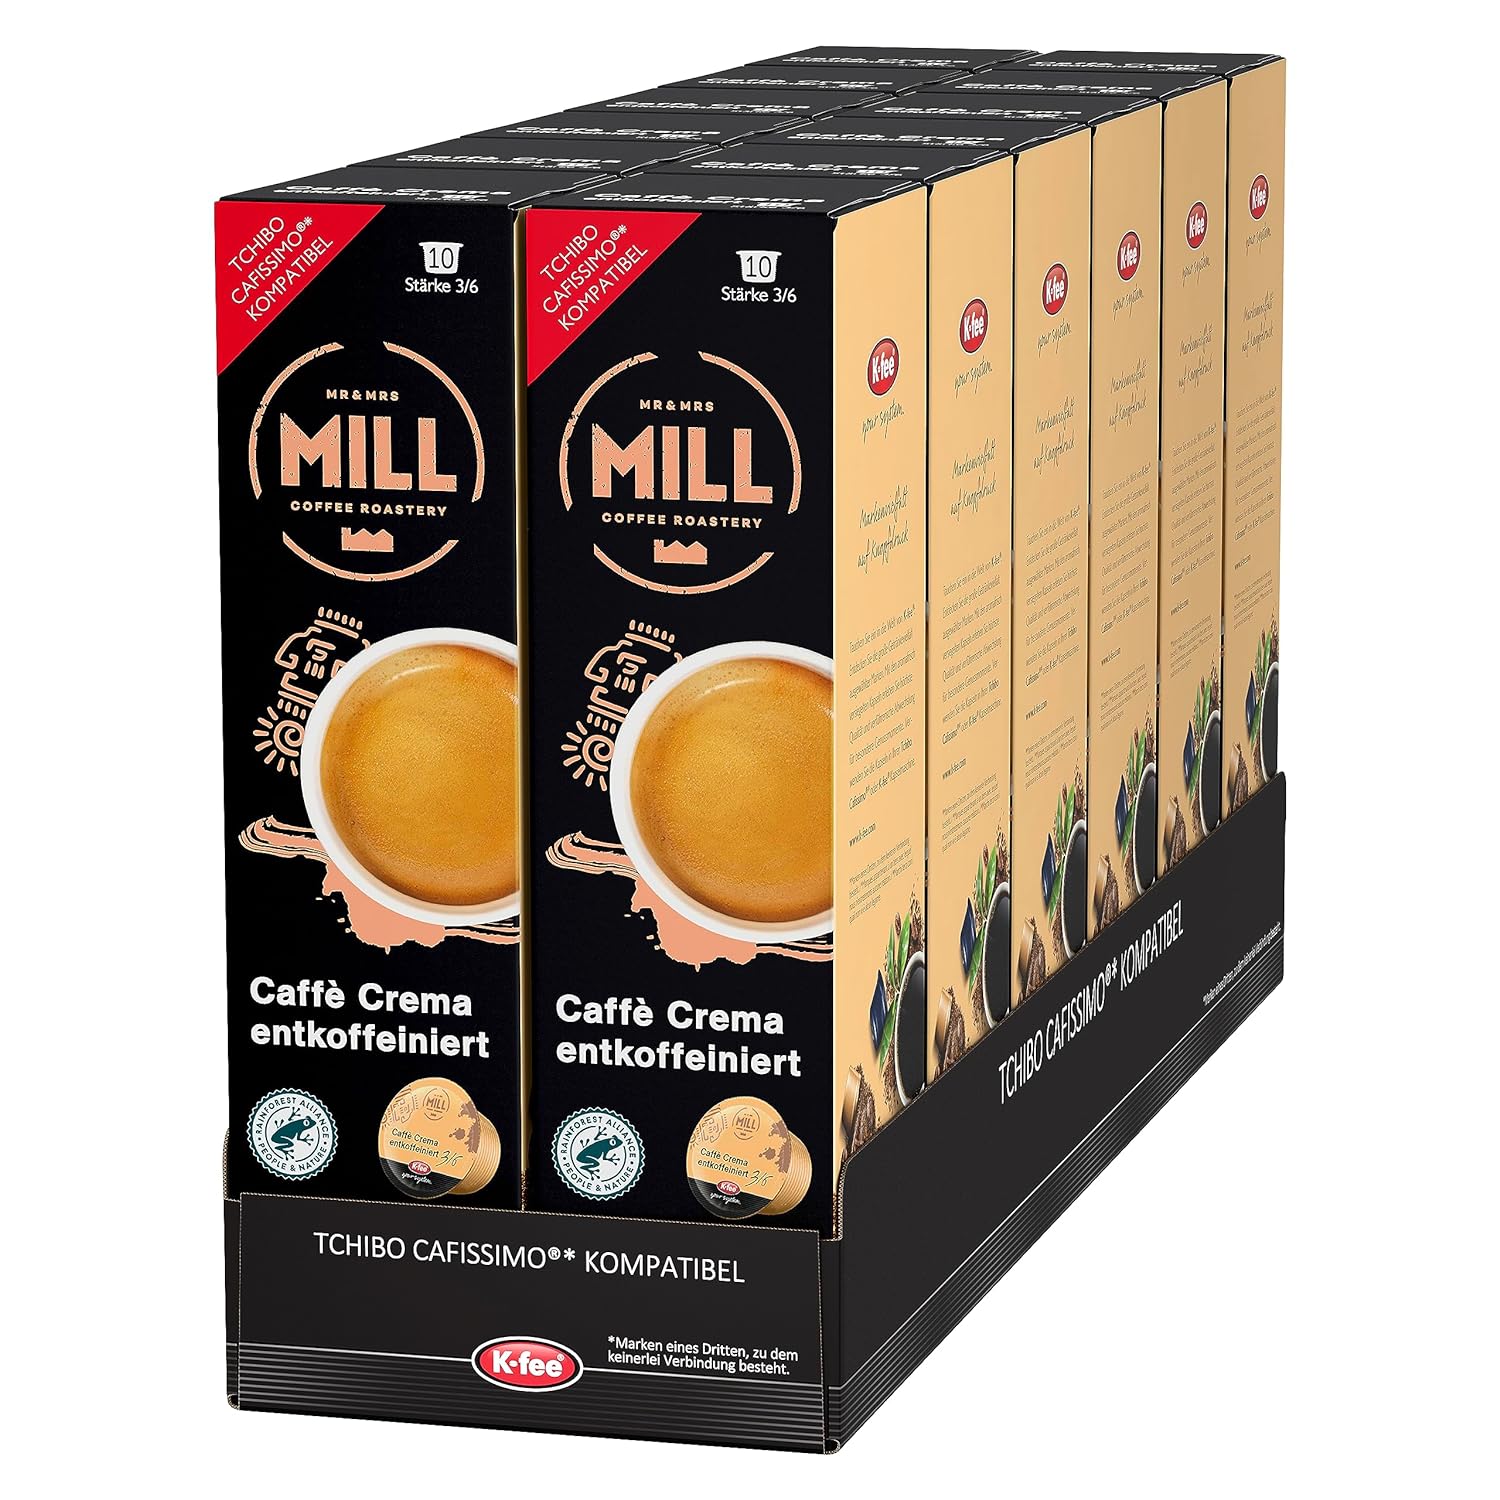 Mr & Mrs Mill Coffee Capsules Caffé Crema Decaffeinated Strength 3/6, Compatible with K-fee & Tchibo Cafissimo*, UTZ Certified, 120 Capsules (12 x 10)